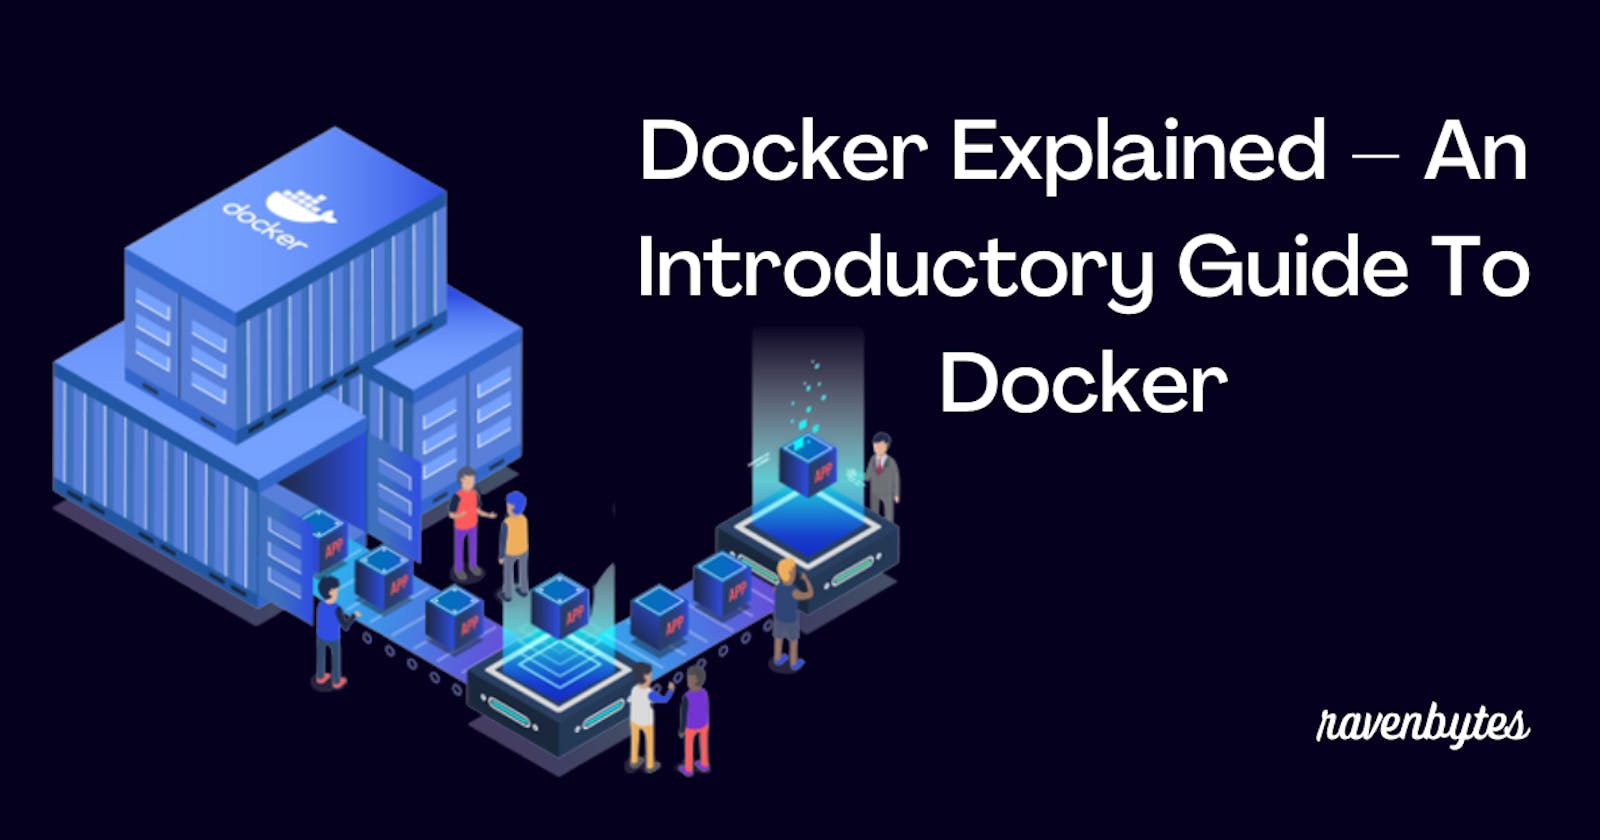 Docker Explained – An Introductory Guide To Docker